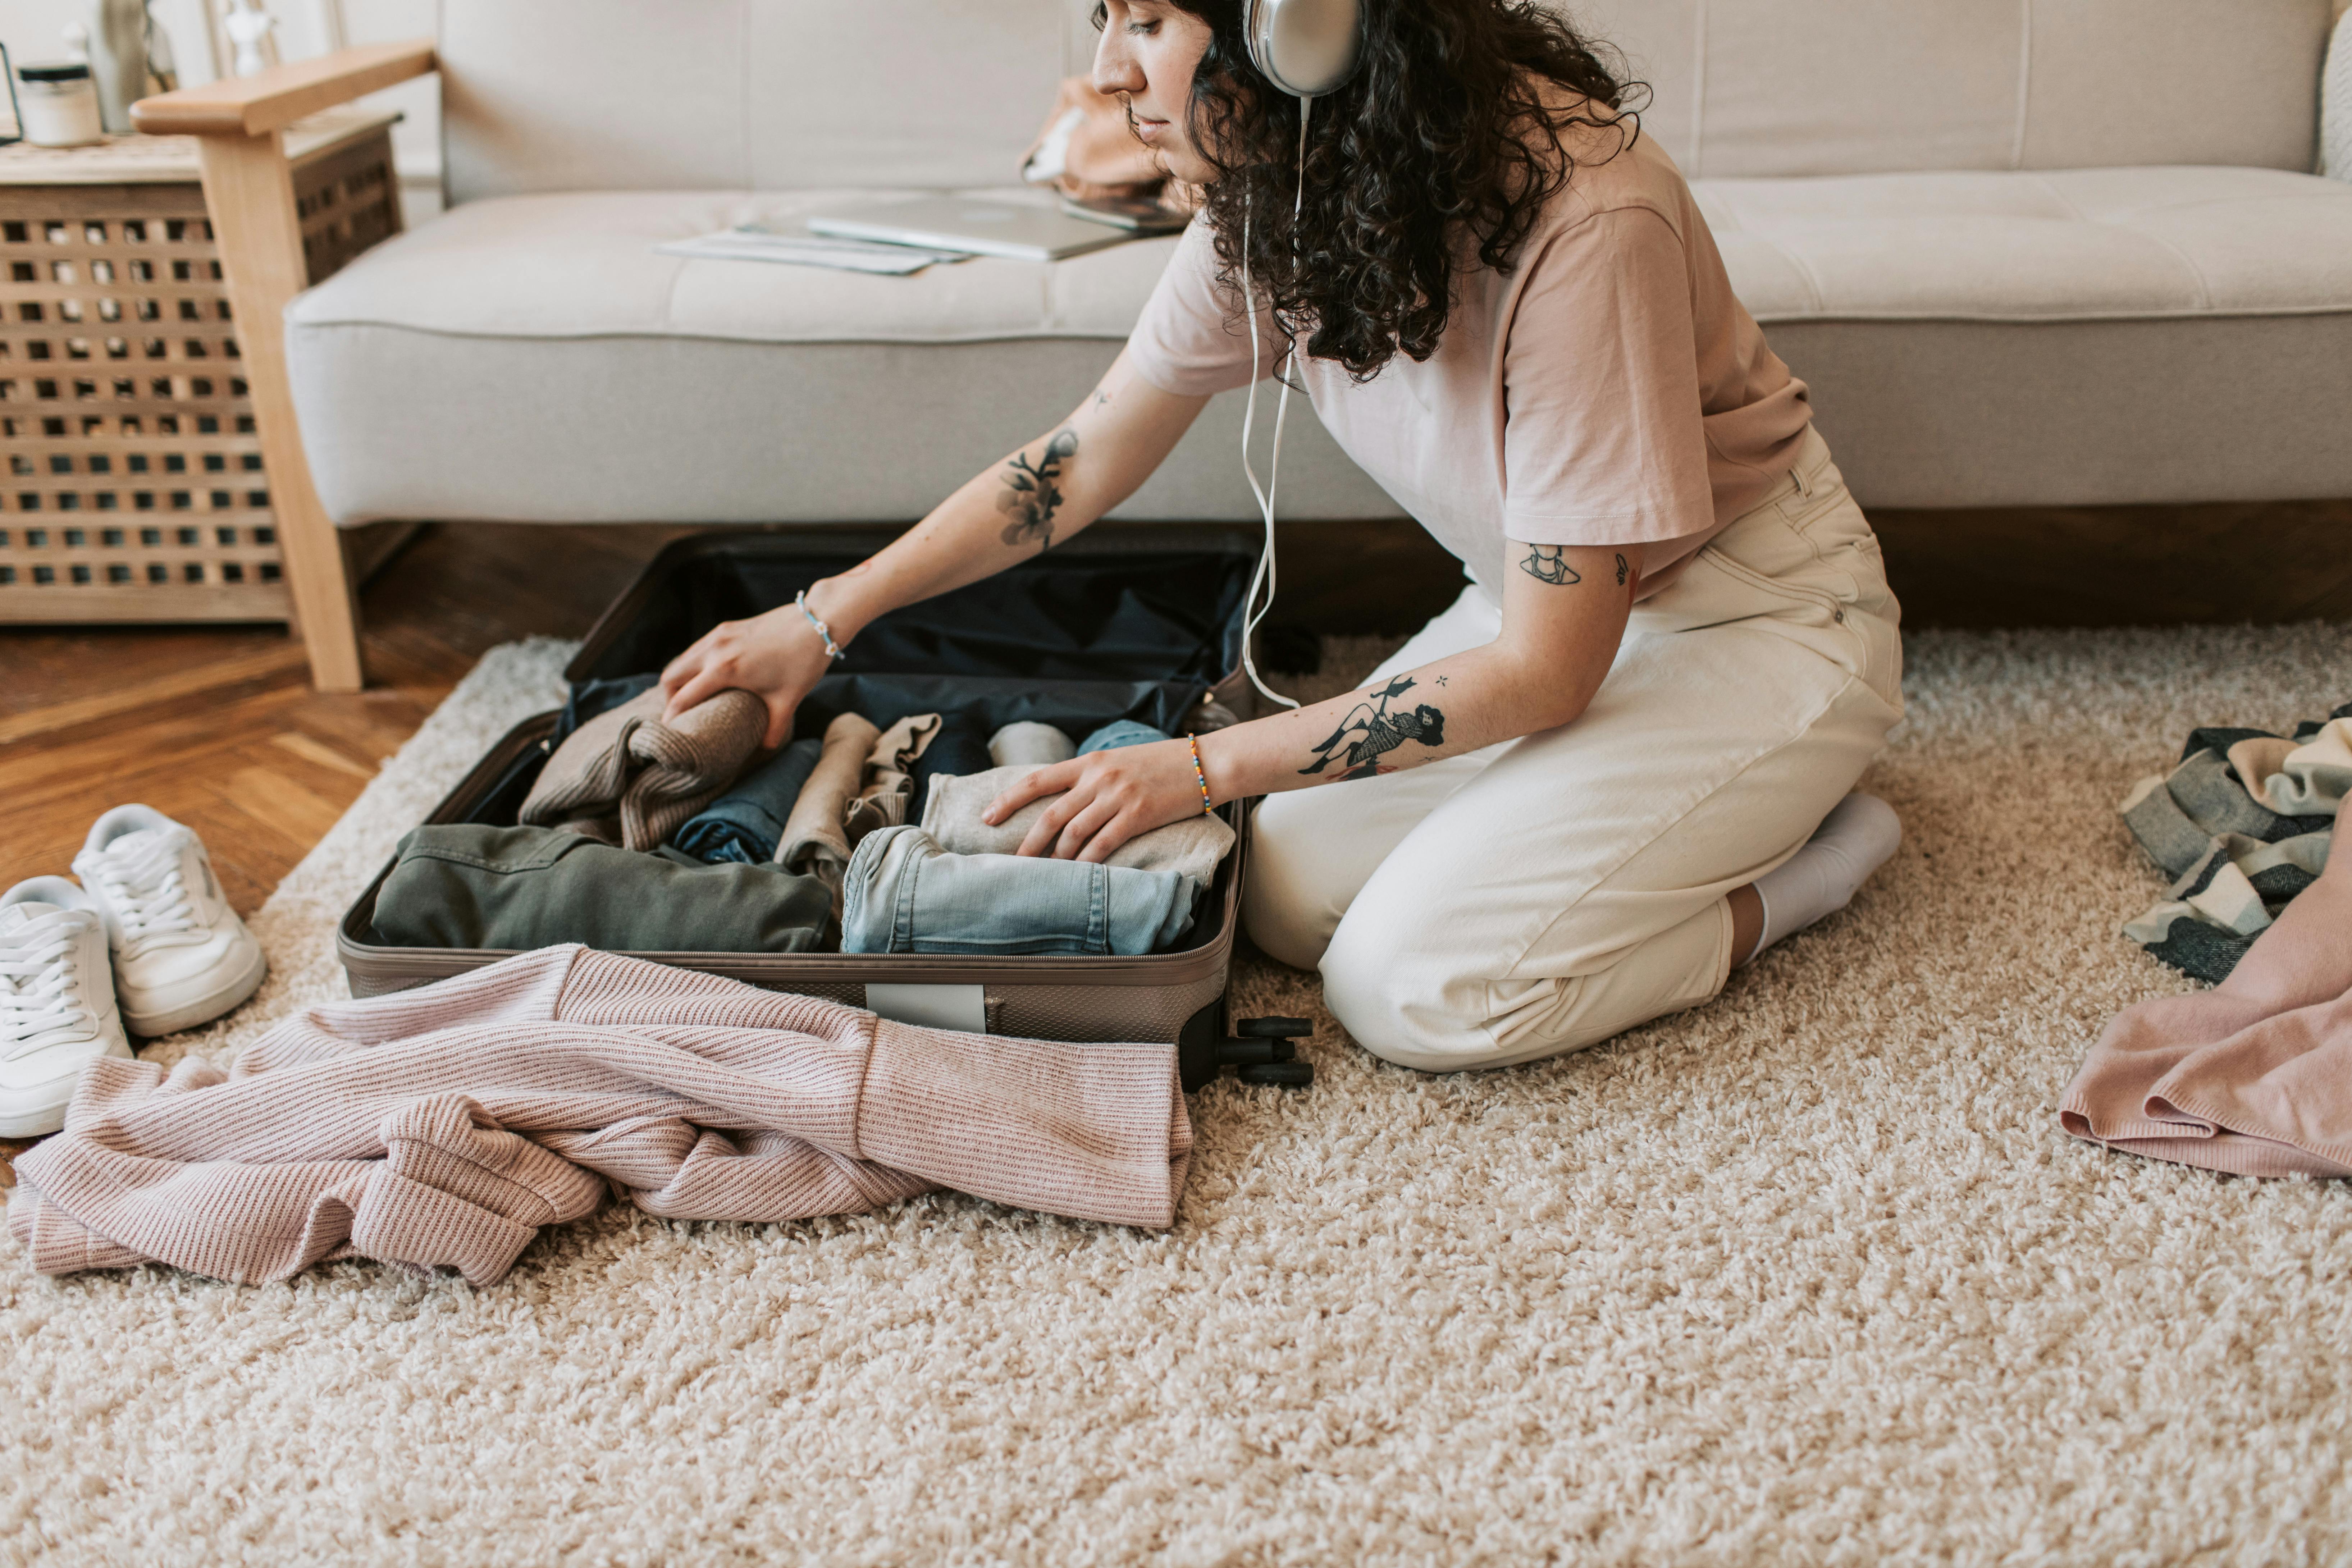 A woman packing her clothes while wearing headsets | Source: Pexels